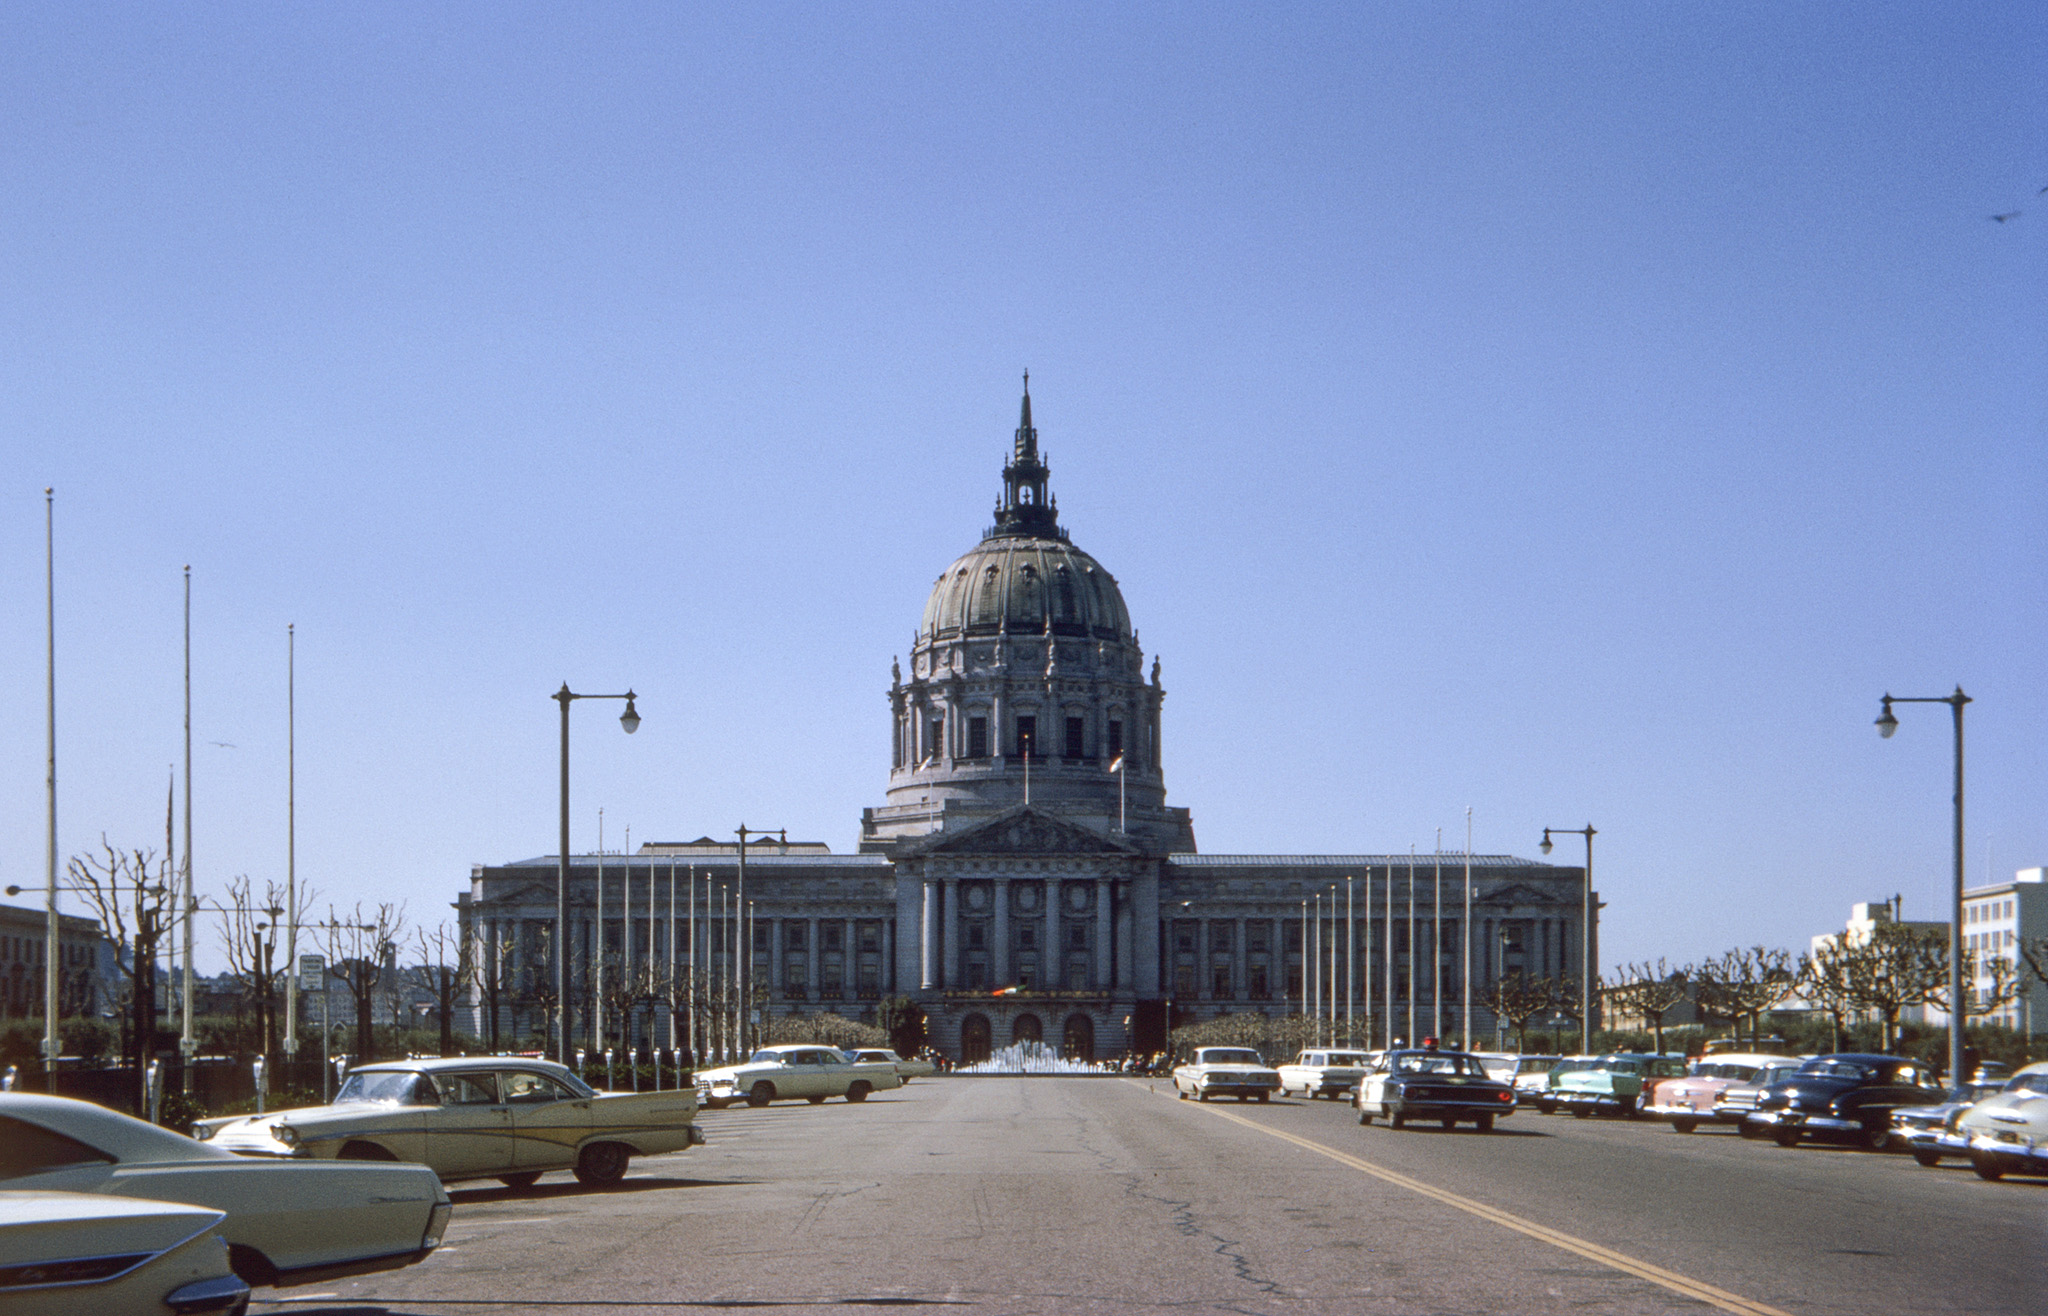 San Francisco City Hall on March 14, 1965. I was with friends to take in the St. Patrick's Day Parade and we apparently tooled around beforehand, giving me an opportunity to take this Kodachrome slide with its smattering of cars, some of them already classics. Back in 1956, Chryslers of that year with their big, luscious tail lights had been among my favorites, and here we have two of them. Among the others, an old bathtub Lincoln, a later-model Thunderbird and a smidgen of a Corvair. If you want to park here now, forget it. Later on at the parade, I took this shot featuring another car, and also a governor. View full size.